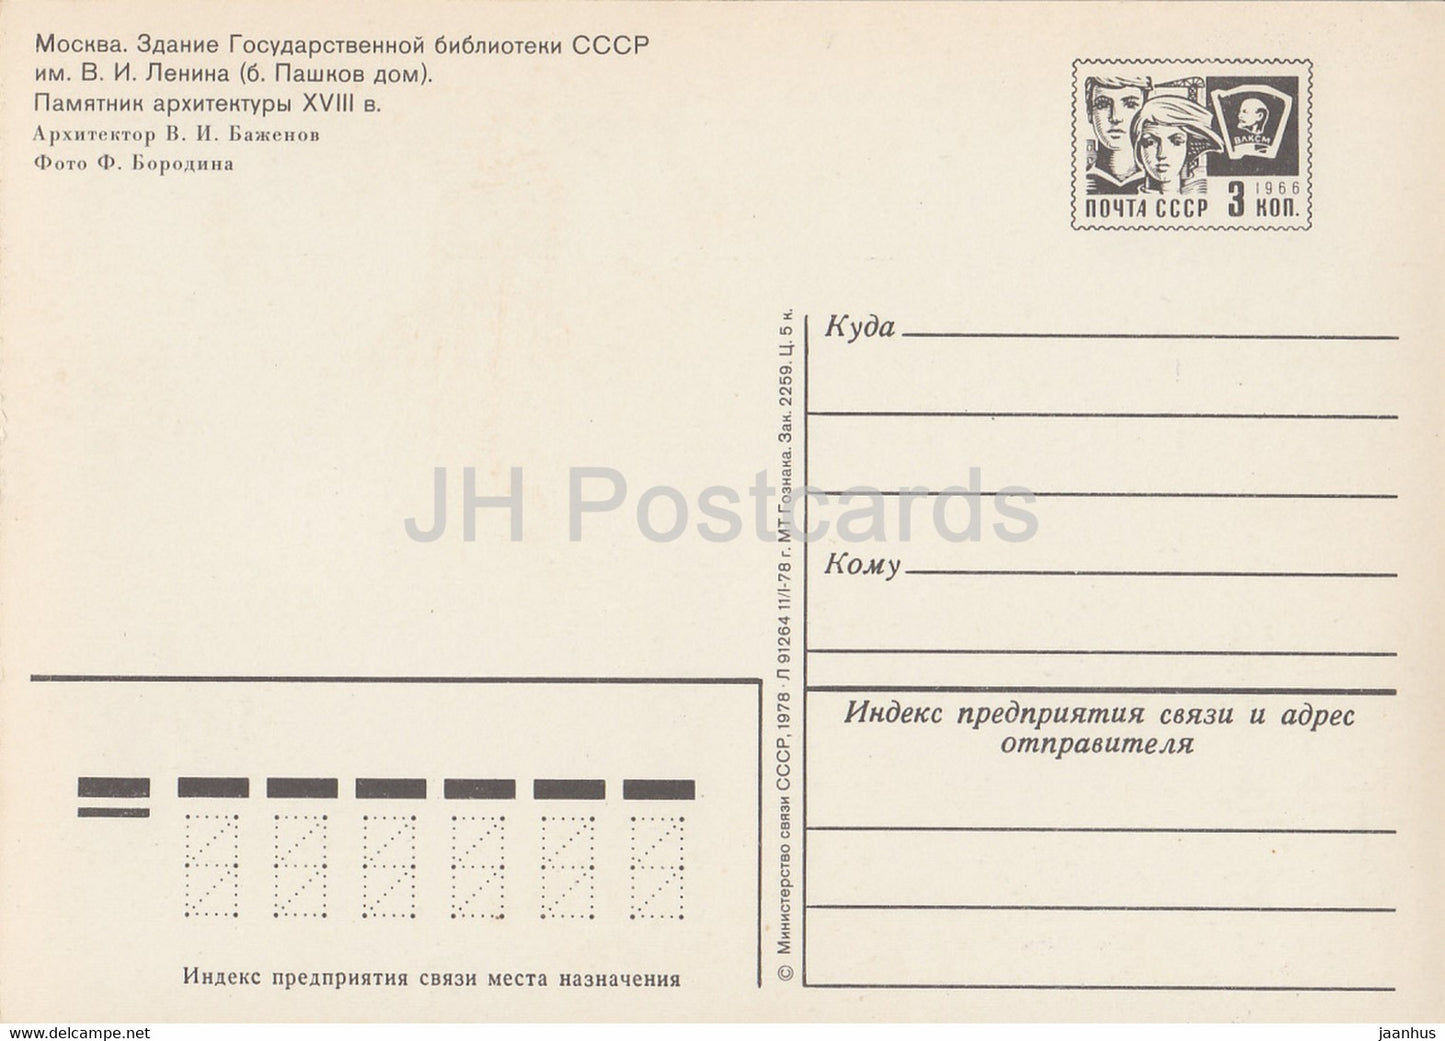 Moscow - Lenin State Library - Pashkov House - postal stationery - 1978 - Russia USSR - unused